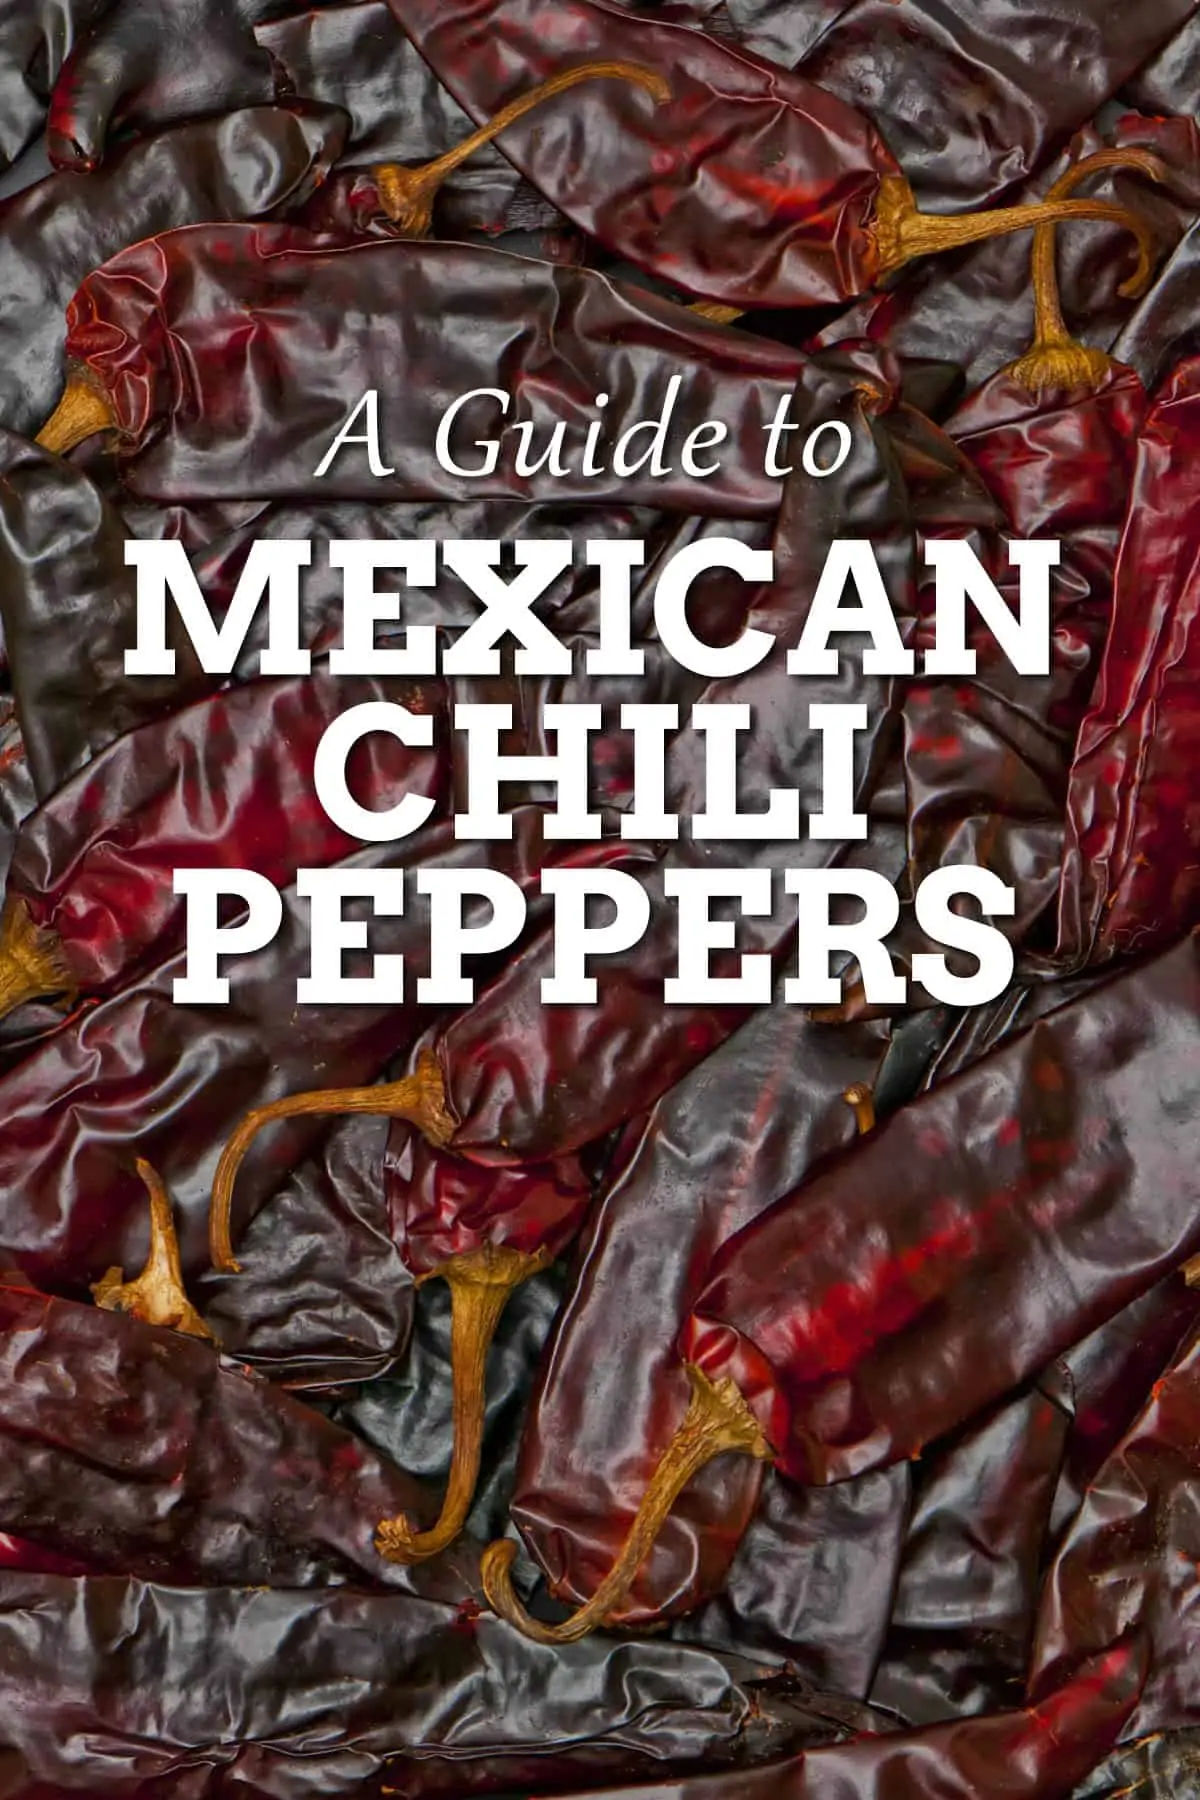 A Guide to Mexican Peppers